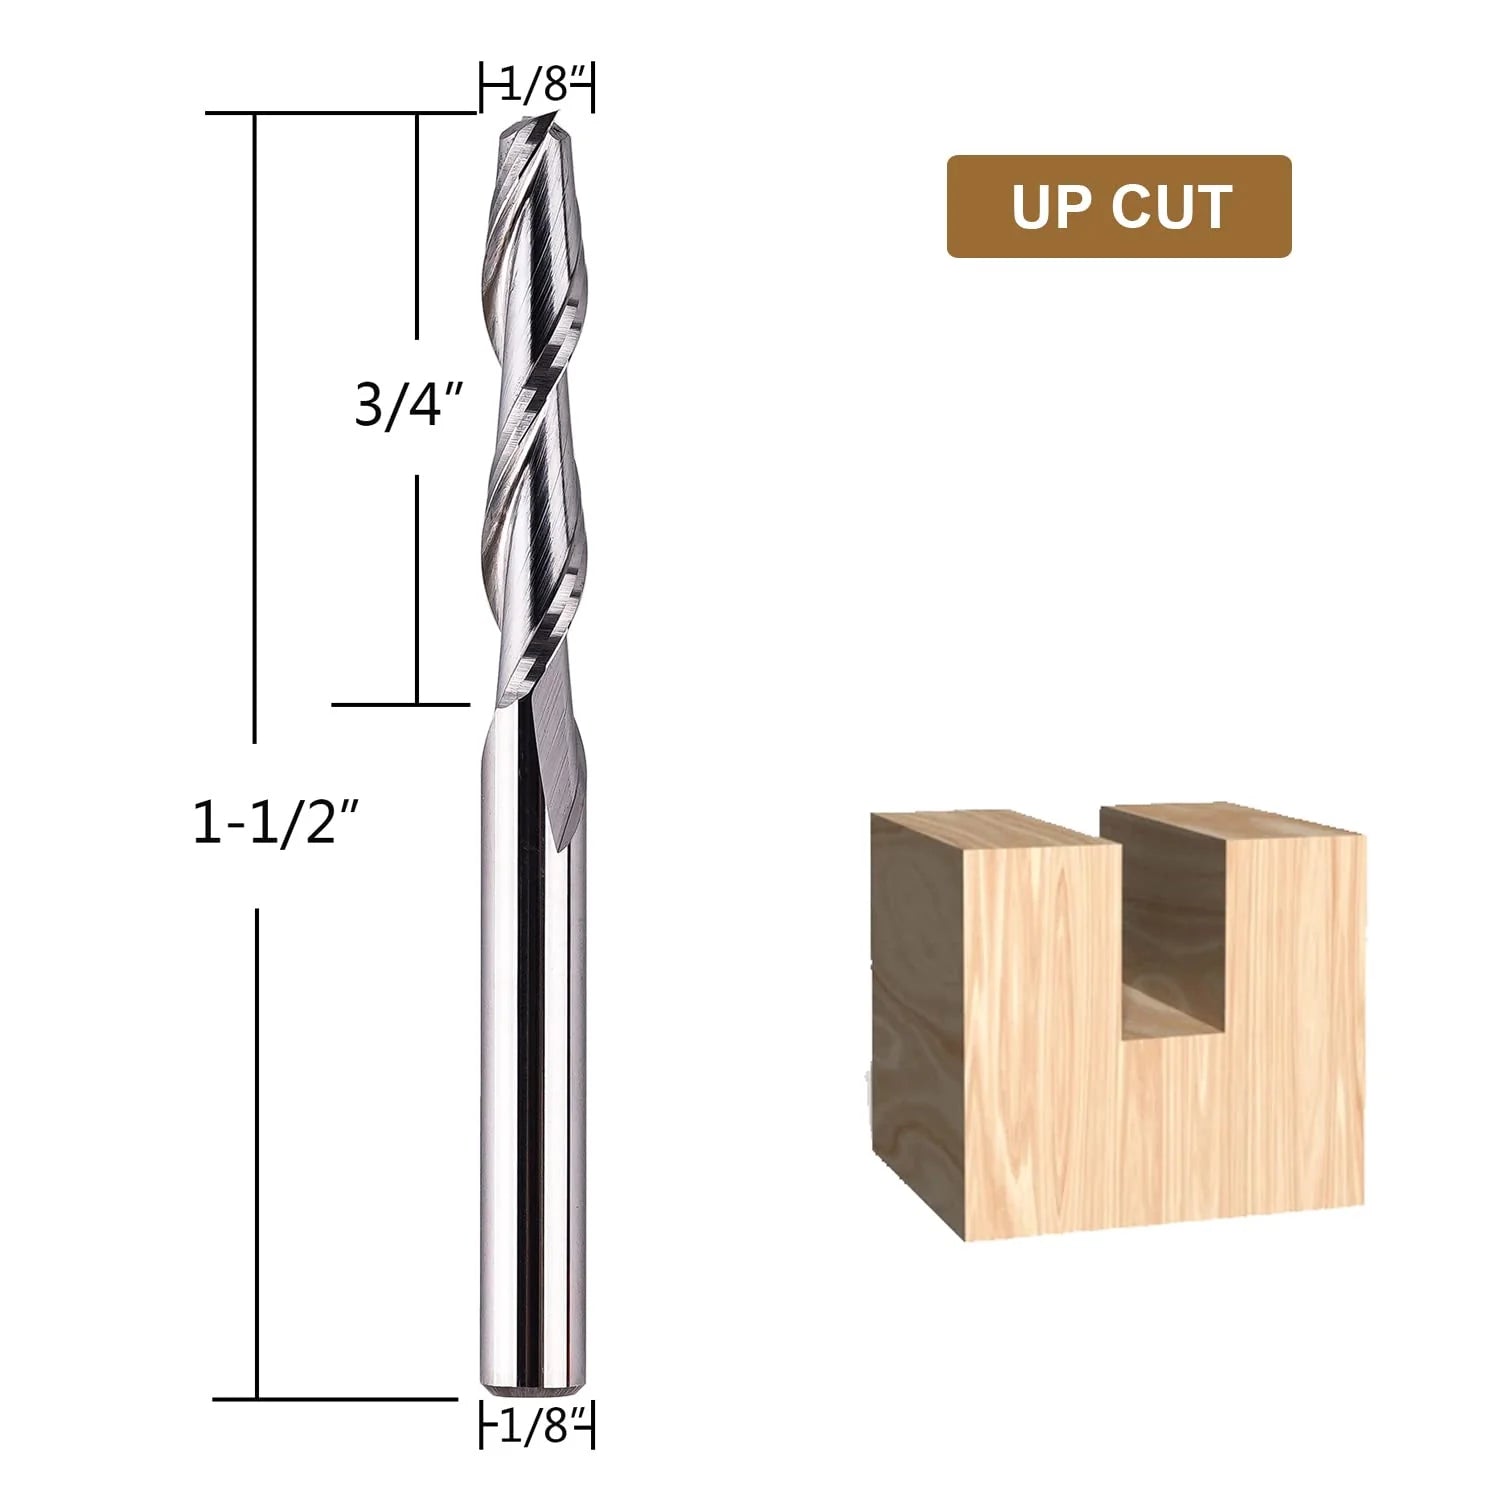 SpeTool Solid Carbide 1/8" Diam 1/8" SHK Up Cut Router Bit for Woodworking